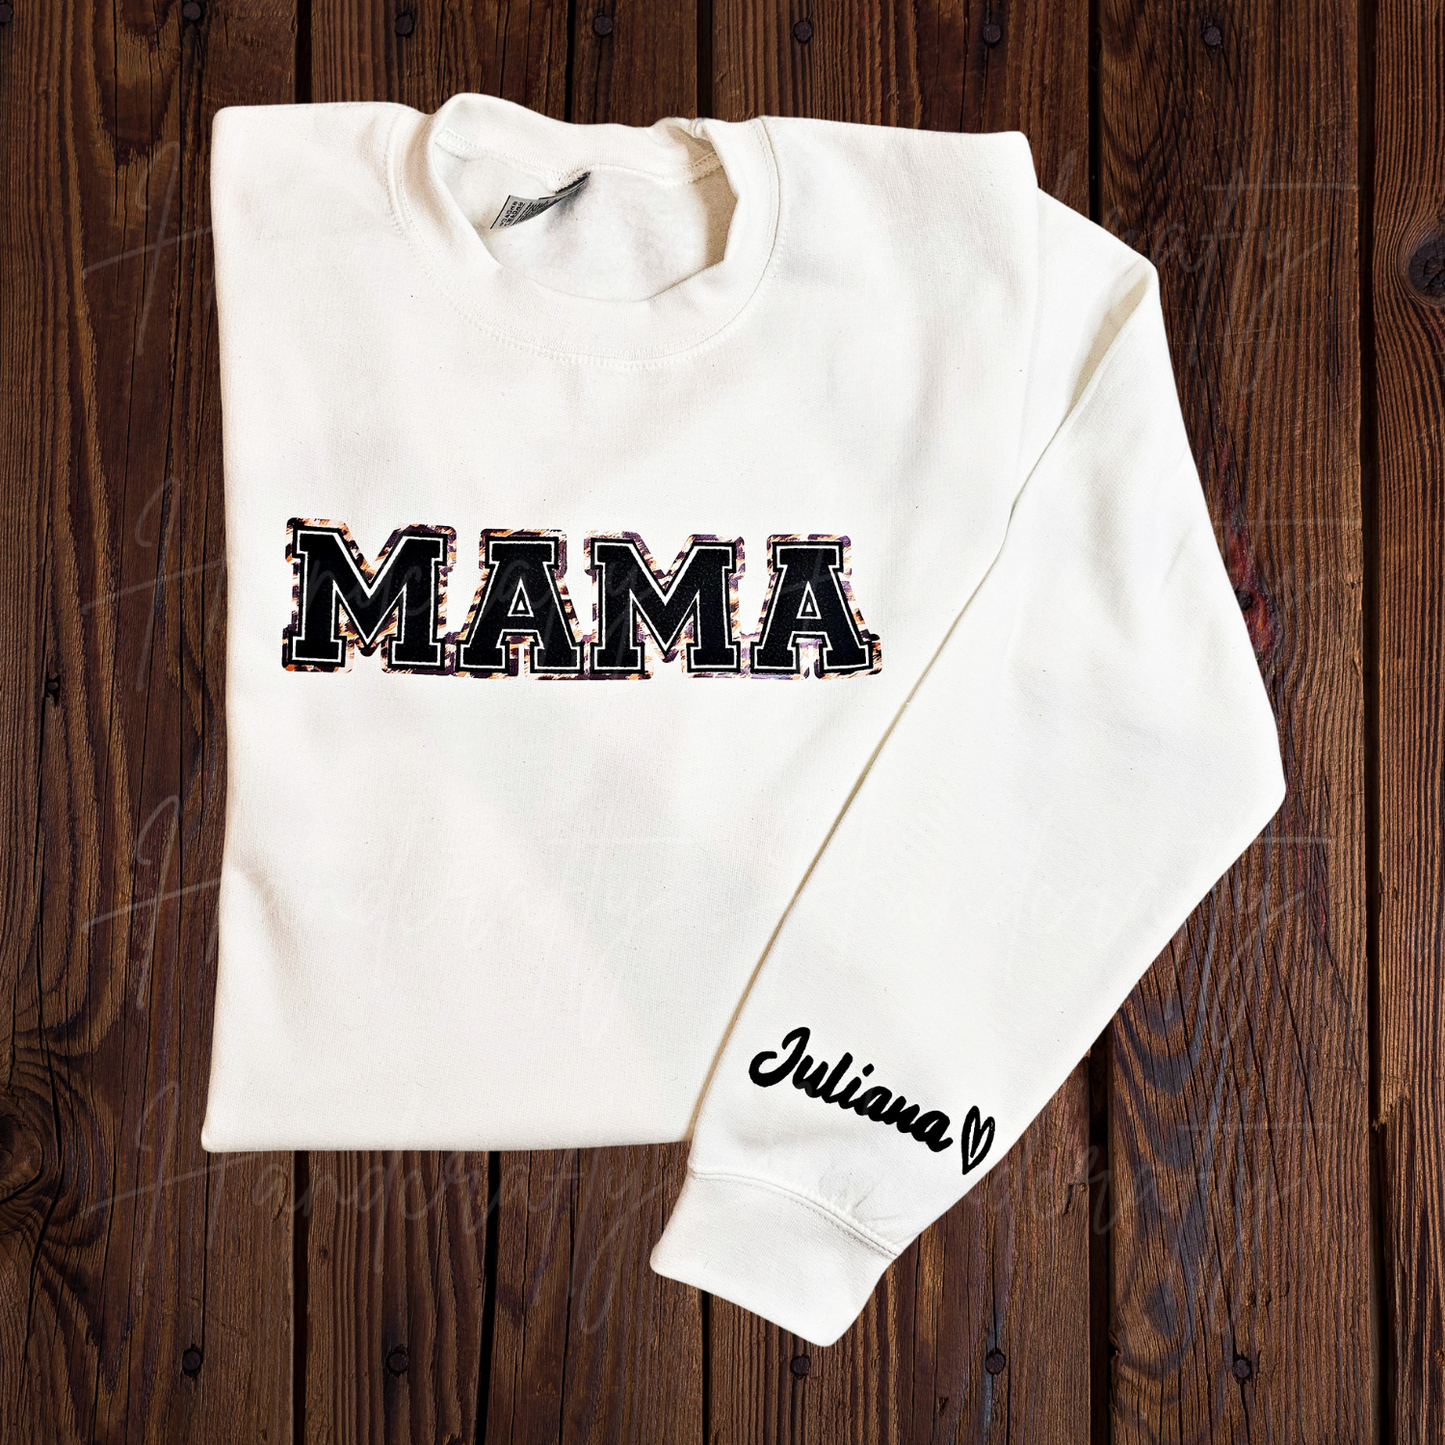 Personalized MOM sweatshirt  with name sleeves, Personalized MAMA Sweatshirt with name sleeves, GIGI sweatshirt with name sleeves, AUNTIE sweatshirt with name sleeves, GRANDMA sweatshirt with name sleeves,  MOM fleece  with name sleeves,  MAMA fleece with name sleeves, GIGI fleece with name sleeves, AUNTIE fleece with name sleeves, GRANDMA fleece with name sleeves.